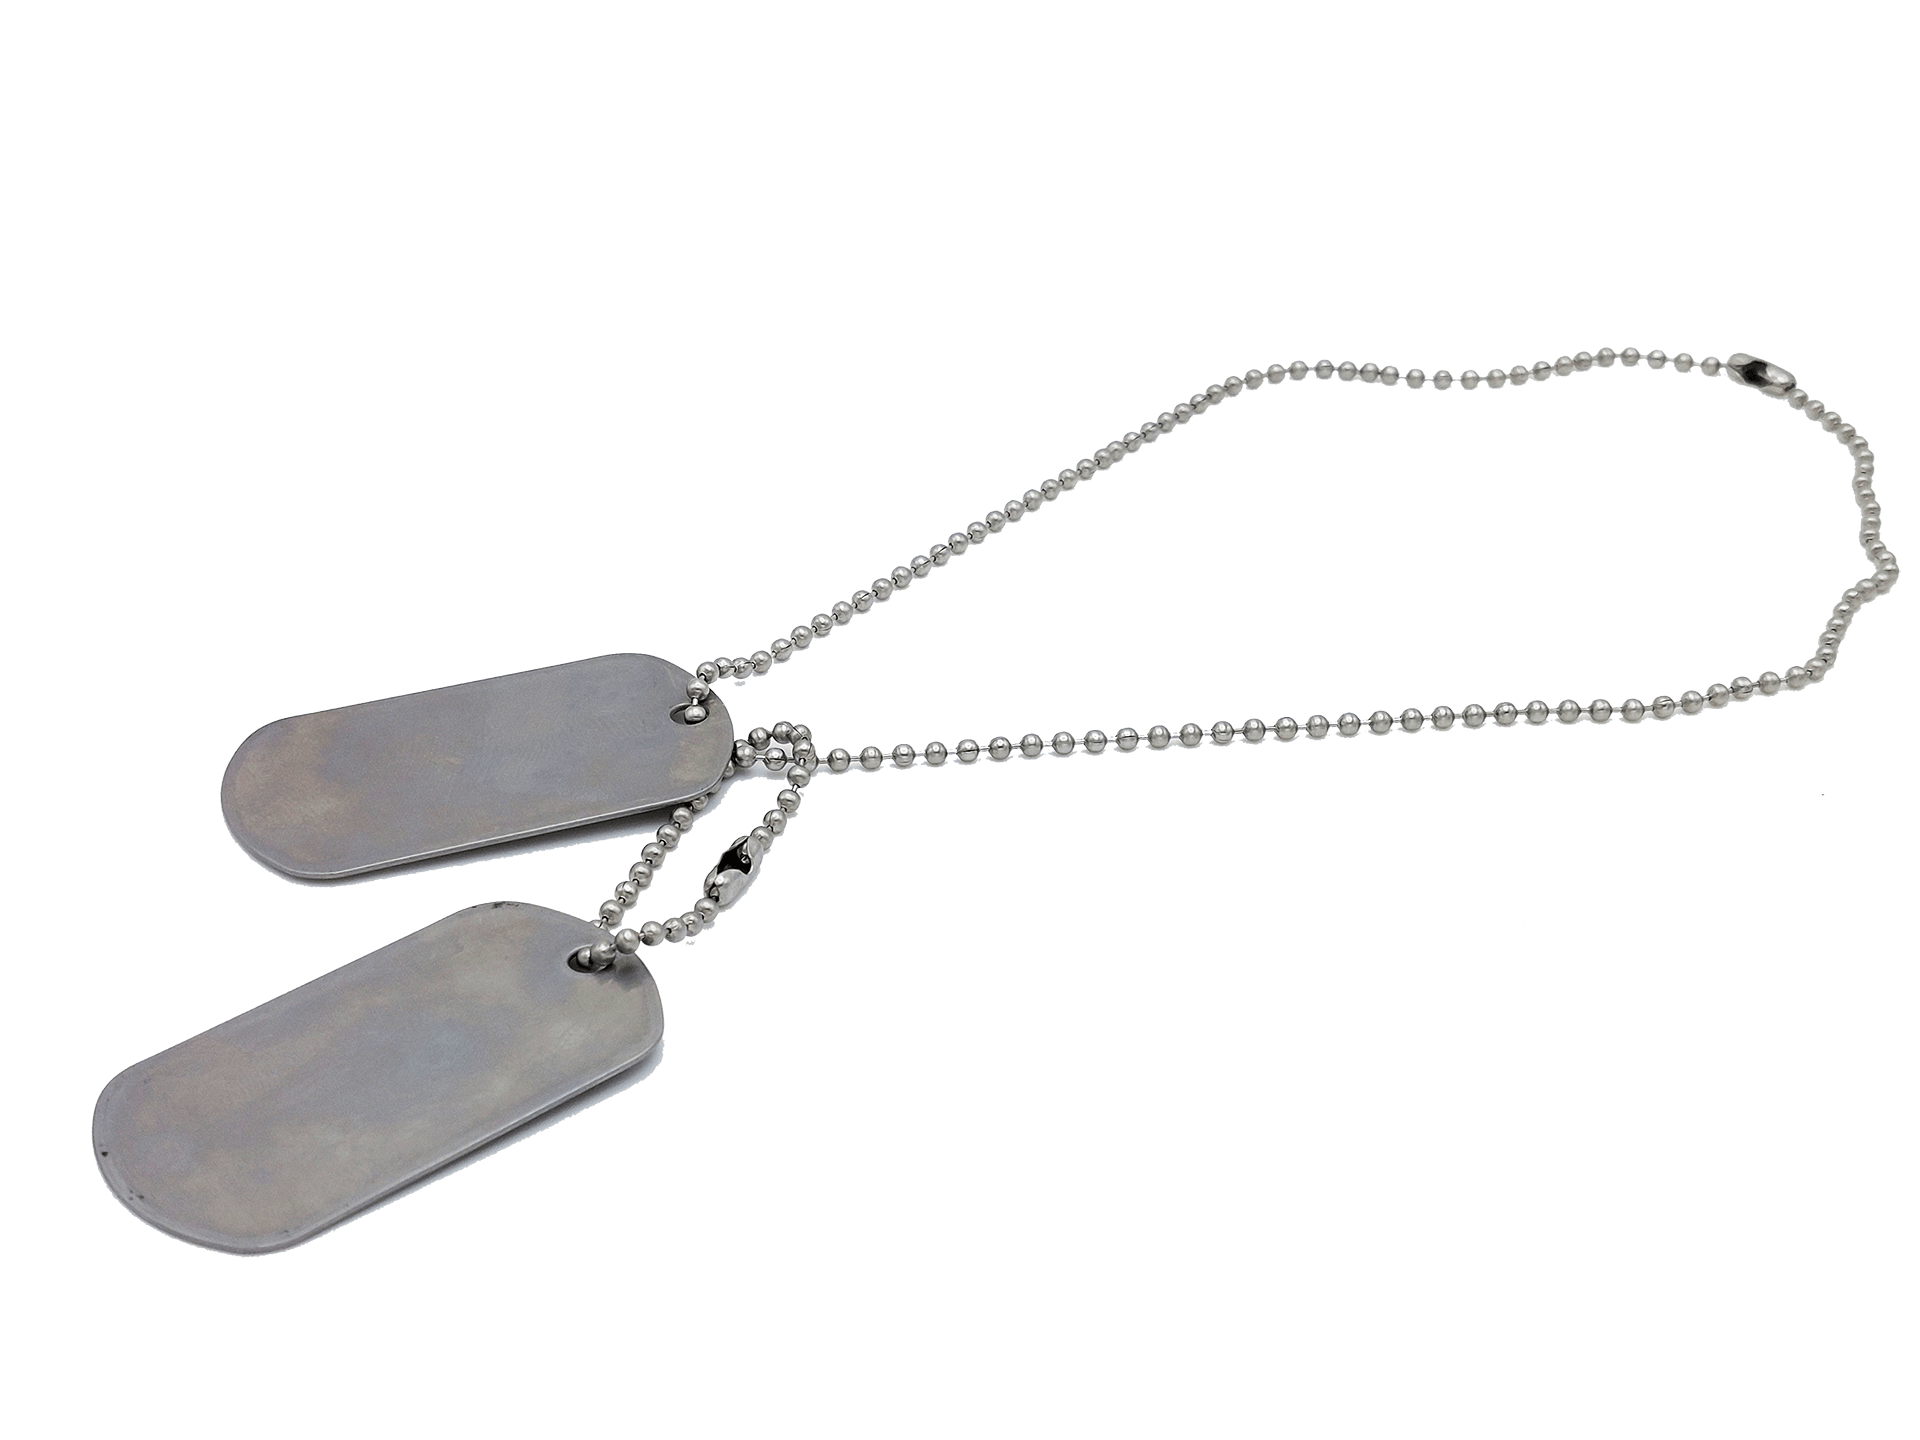 A set of our vietnam era blank dog tags on a metal chain.